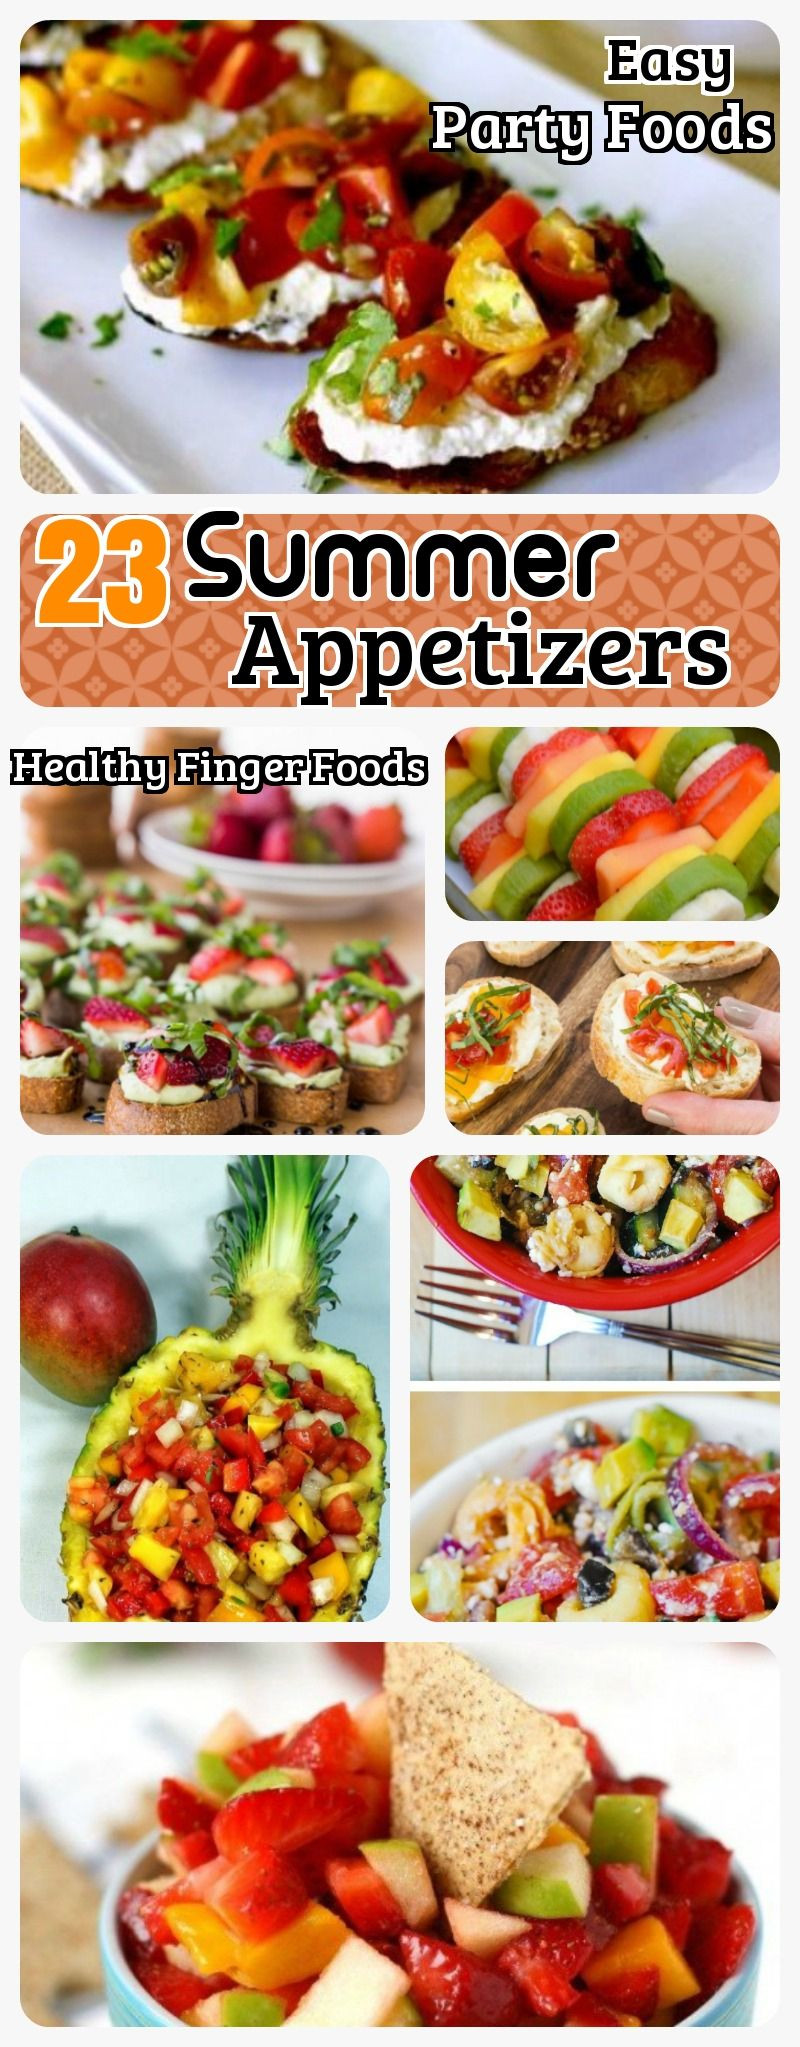 Finger Food Ideas For Summer Party
 23 Summer appetizers for Scorching Summer Easy Healthy